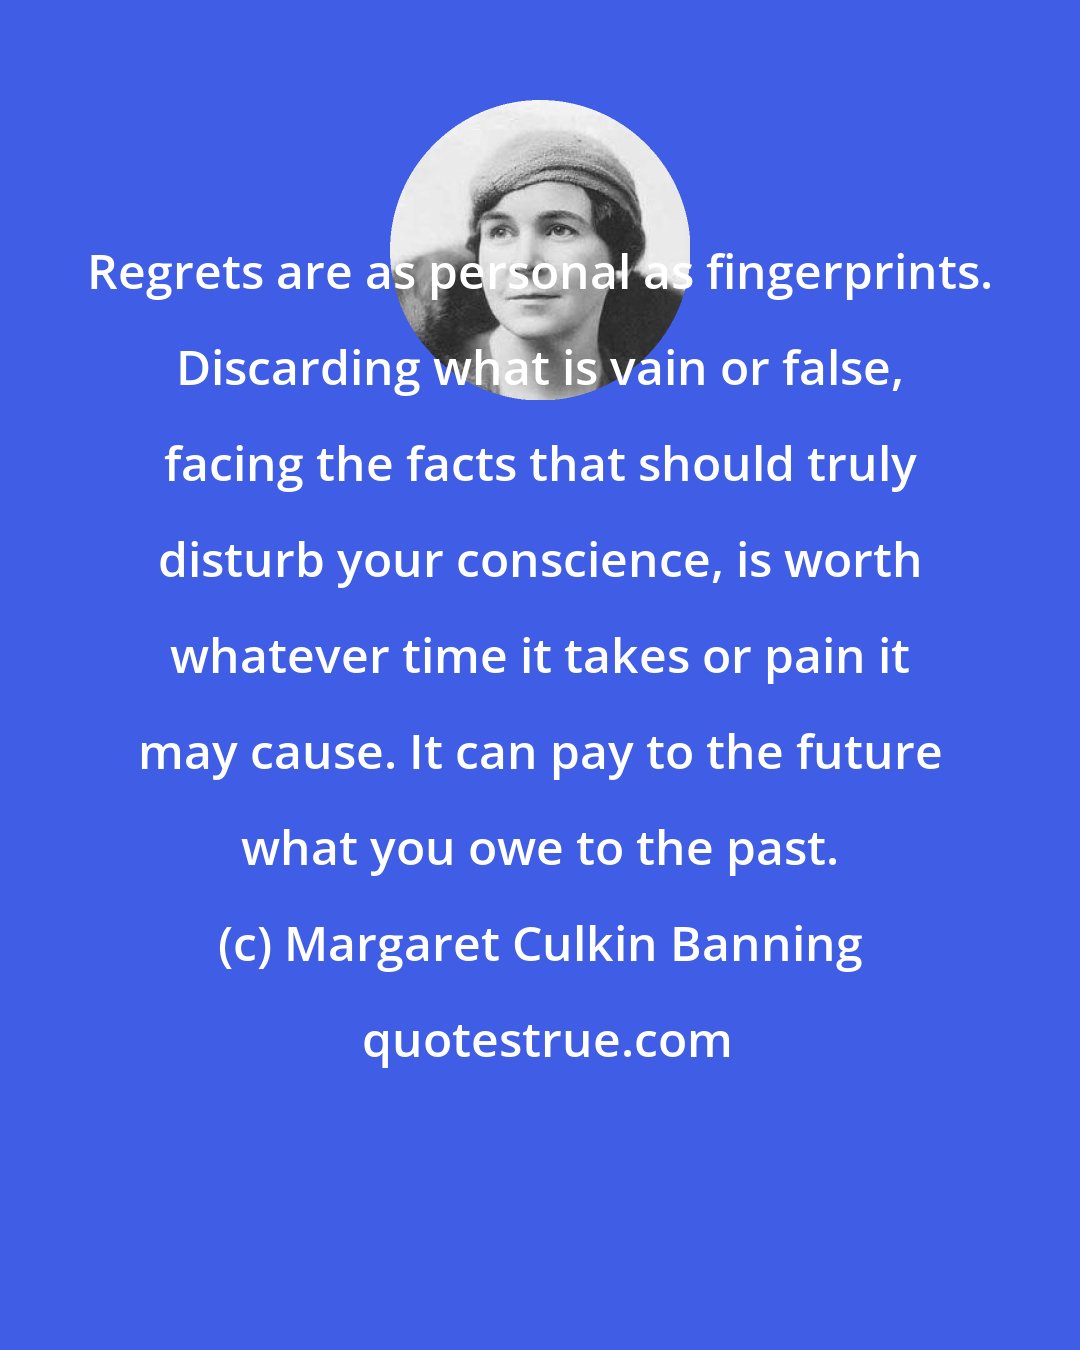 Margaret Culkin Banning: Regrets are as personal as fingerprints. Discarding what is vain or false, facing the facts that should truly disturb your conscience, is worth whatever time it takes or pain it may cause. It can pay to the future what you owe to the past.